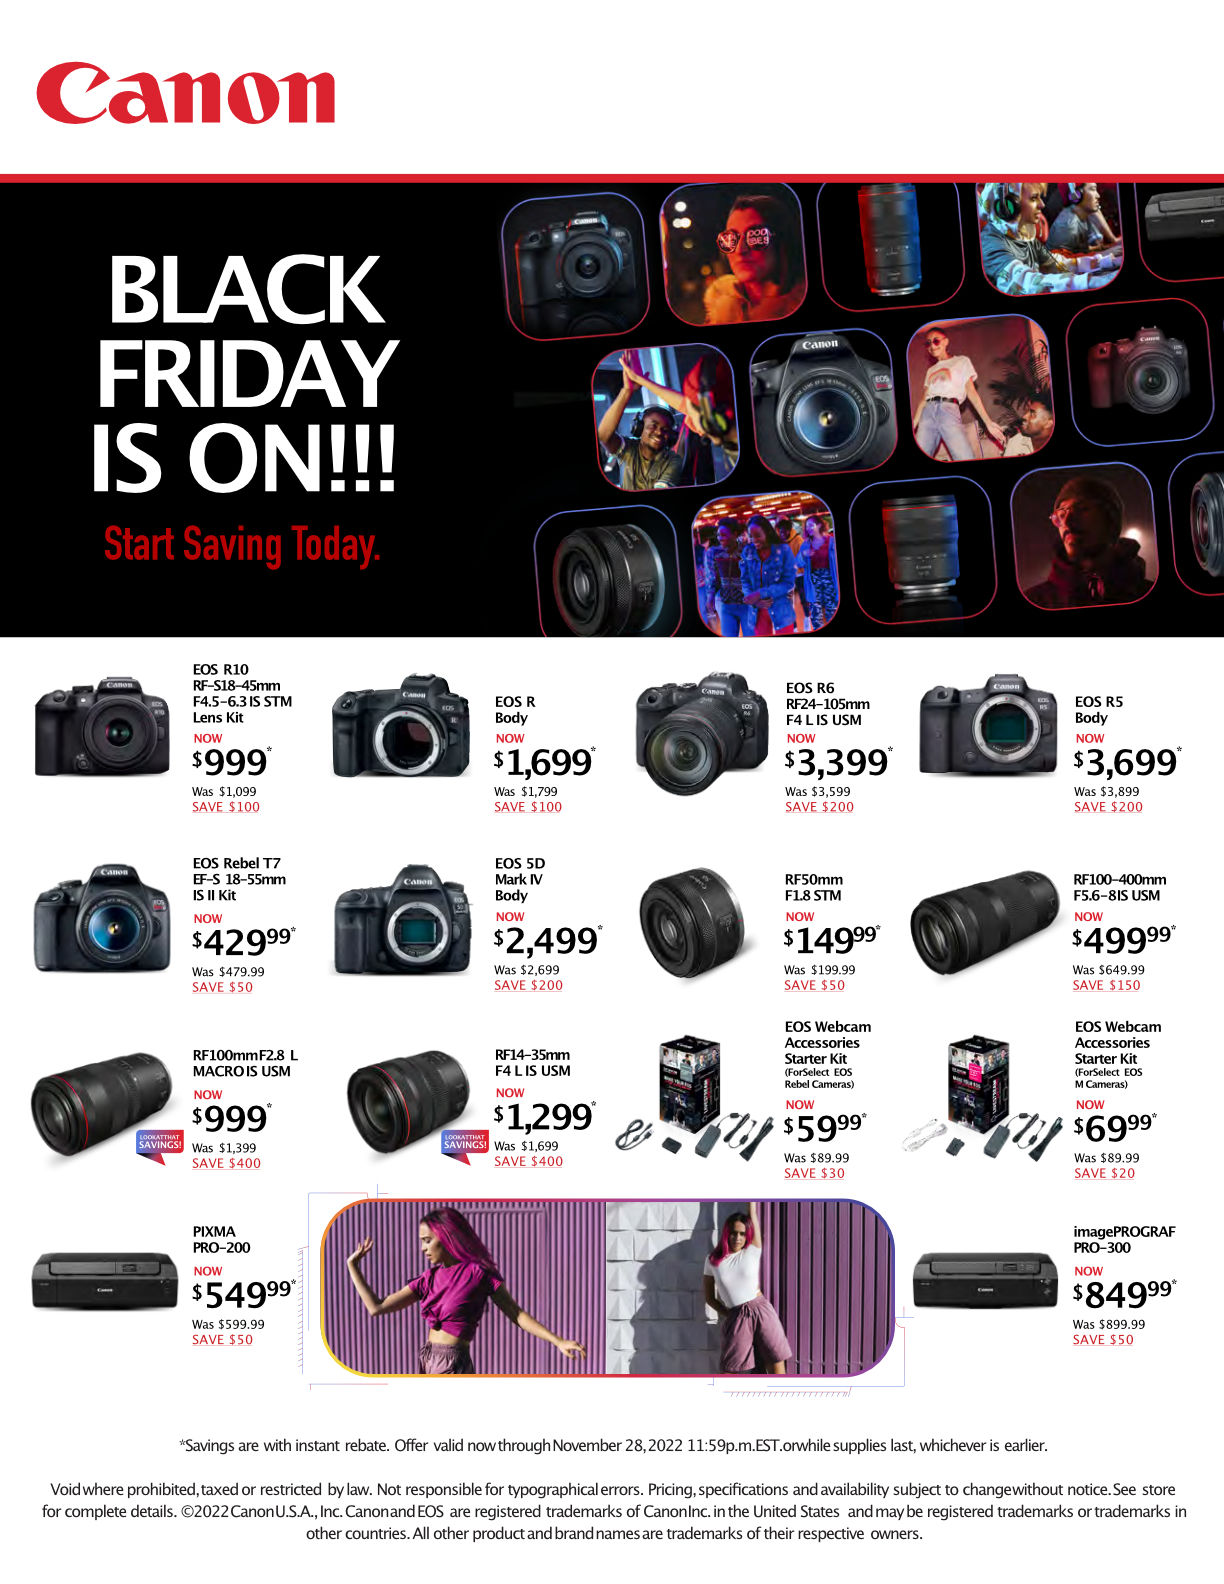 Canon Black Friday is On Deals